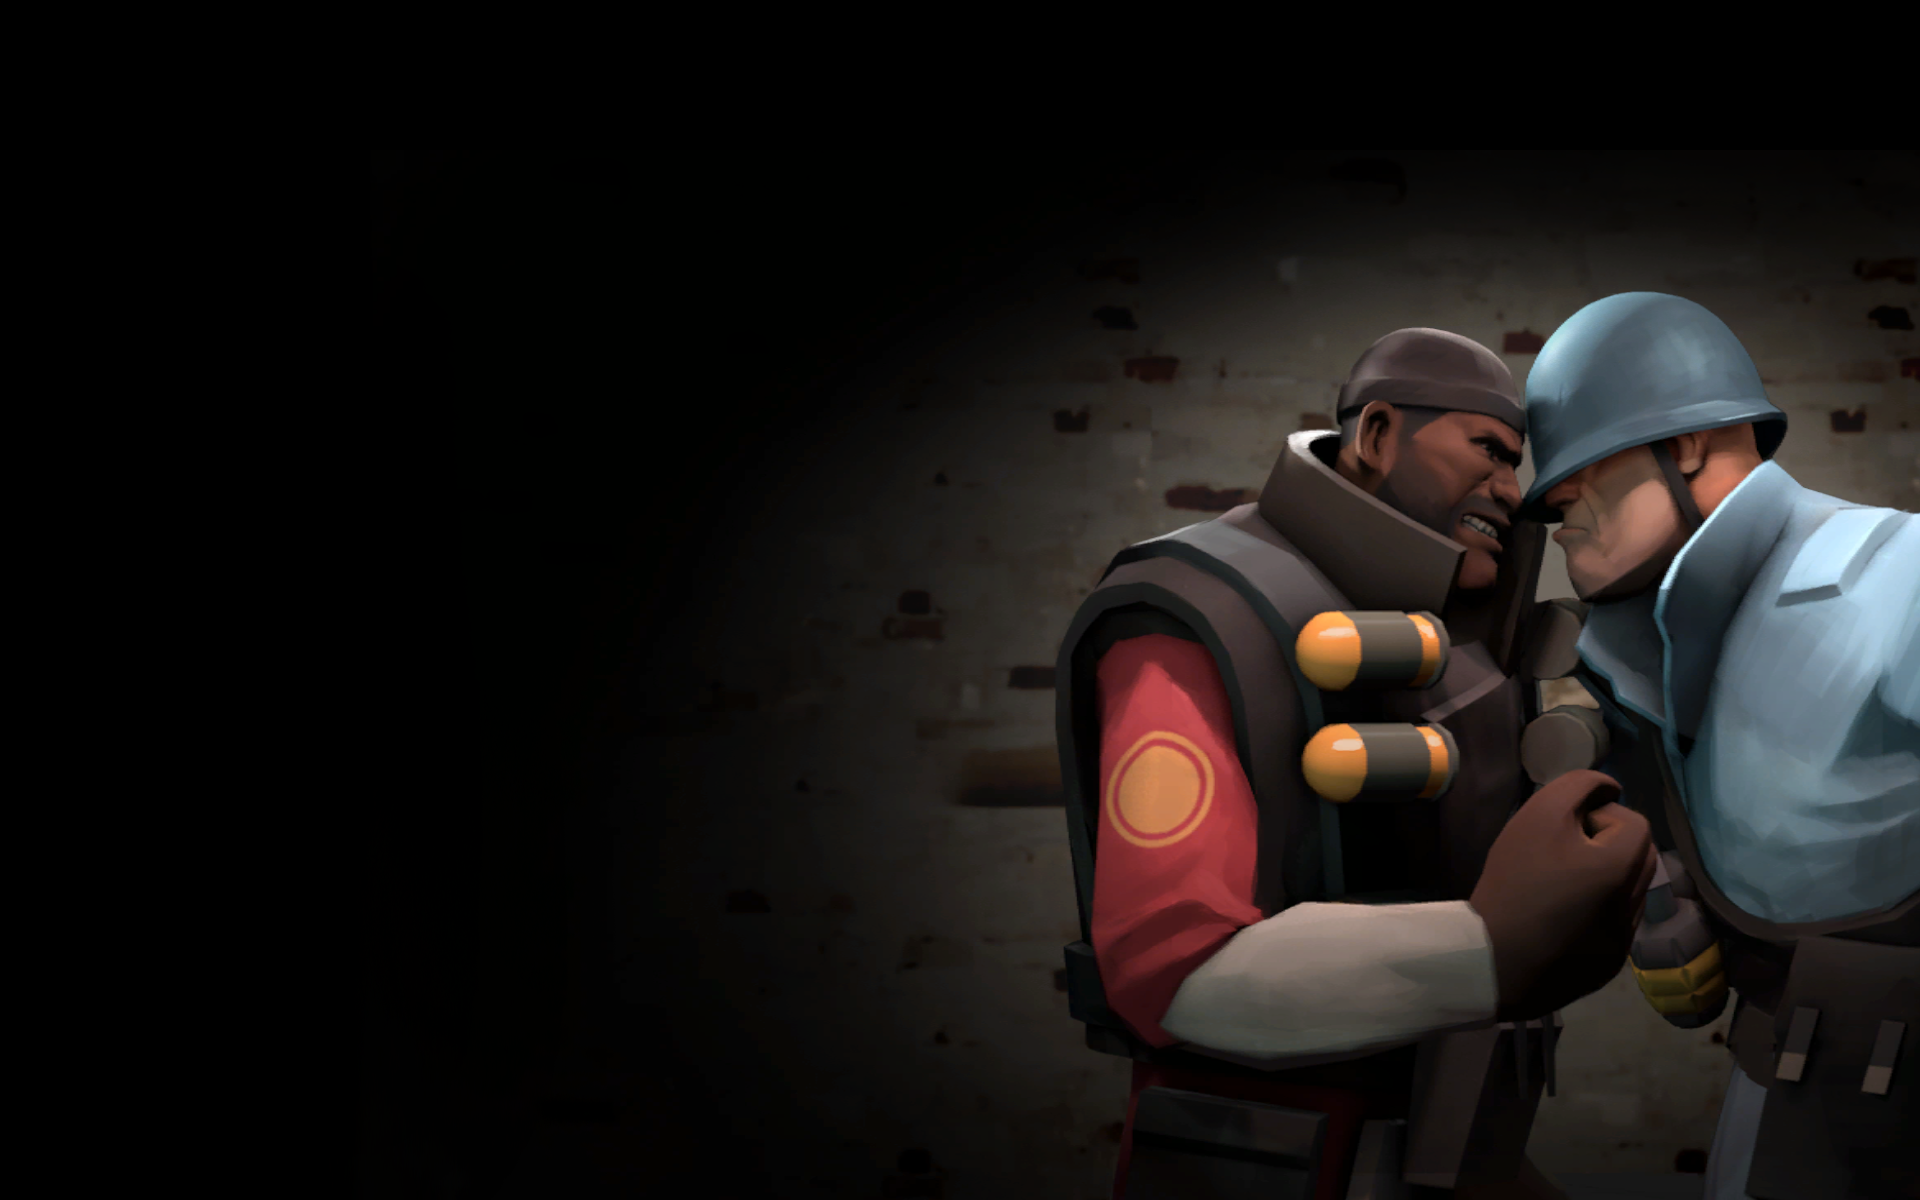 TF2 Wallpapers | Games Wallpapers Gallery - PC ...